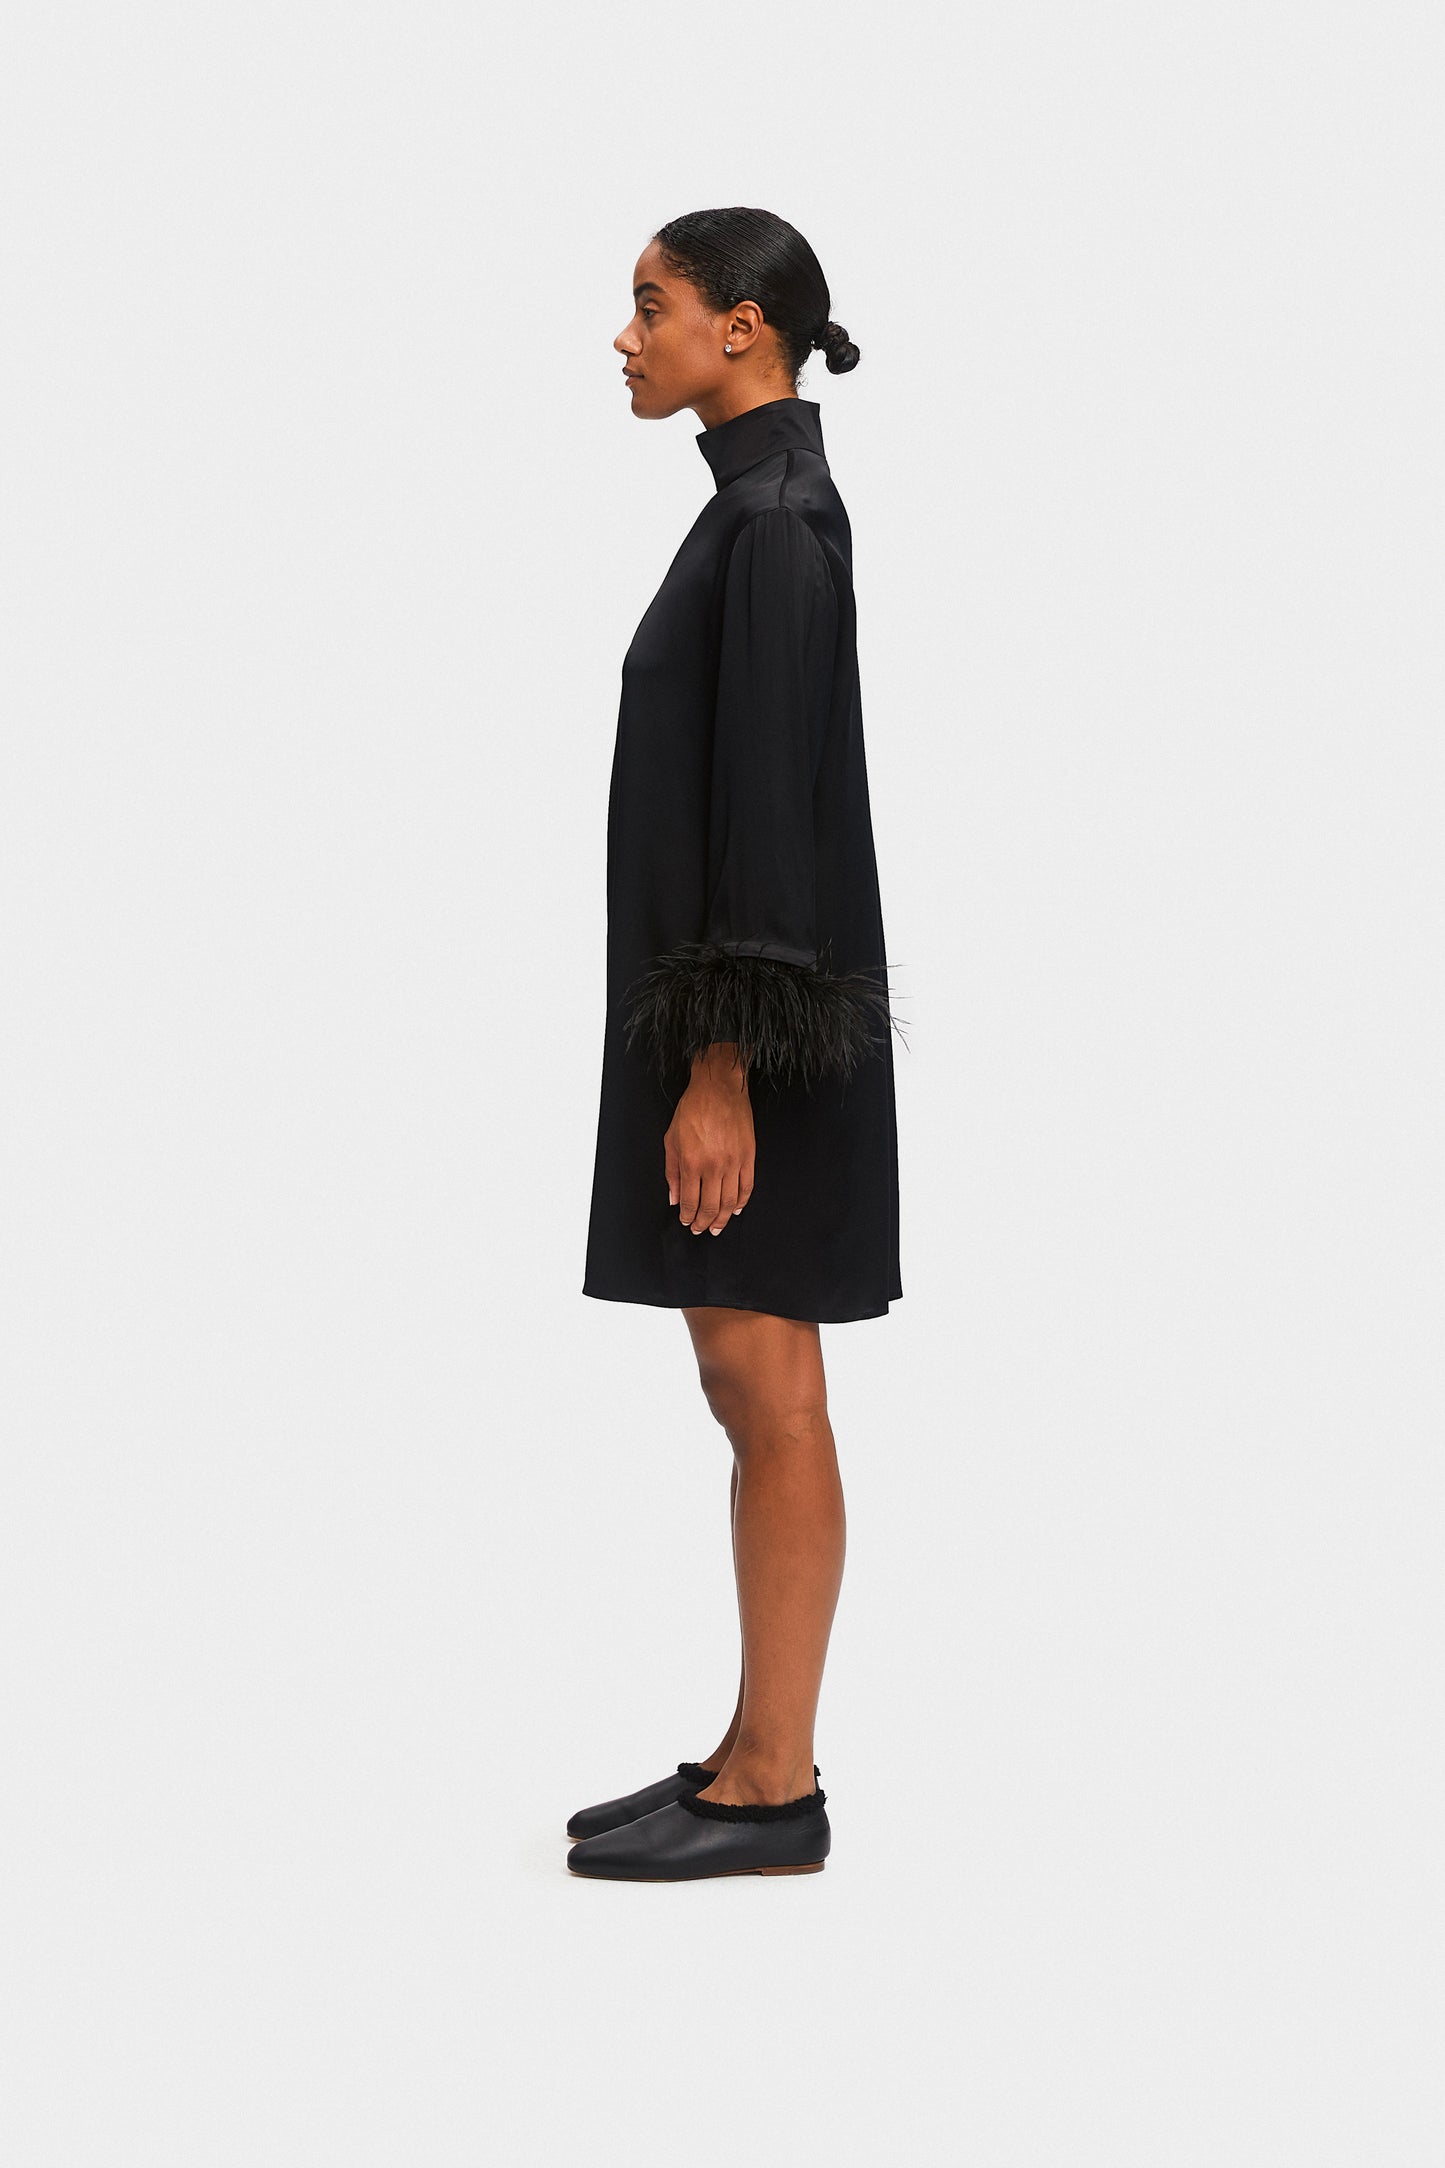 Party Shirt Dress with Detachable Feathers in Black